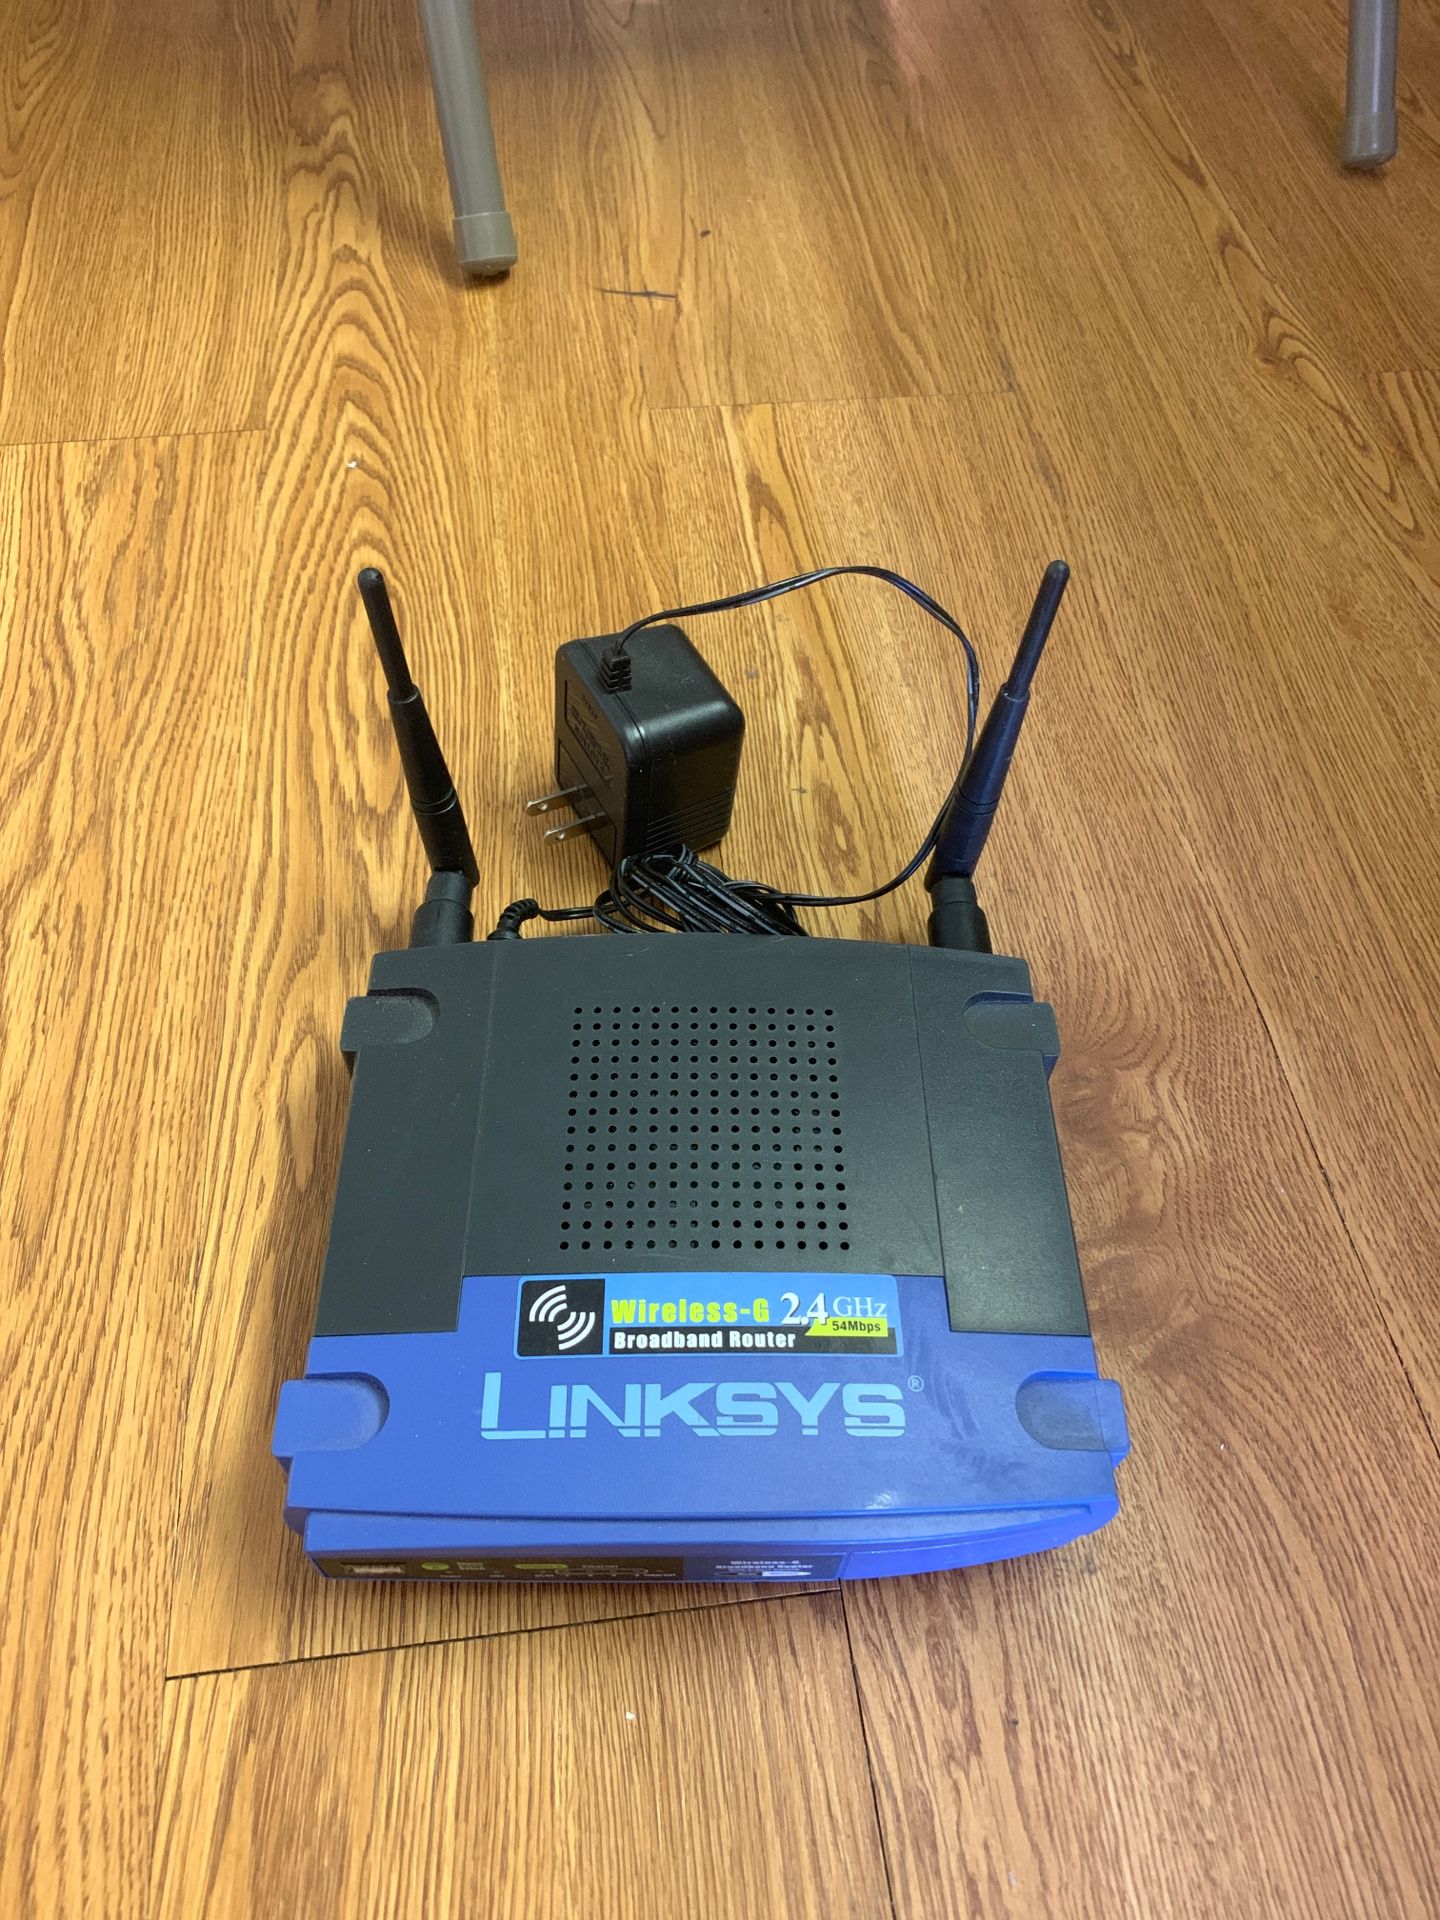 Linksys Wireless G 2.4 ghz router